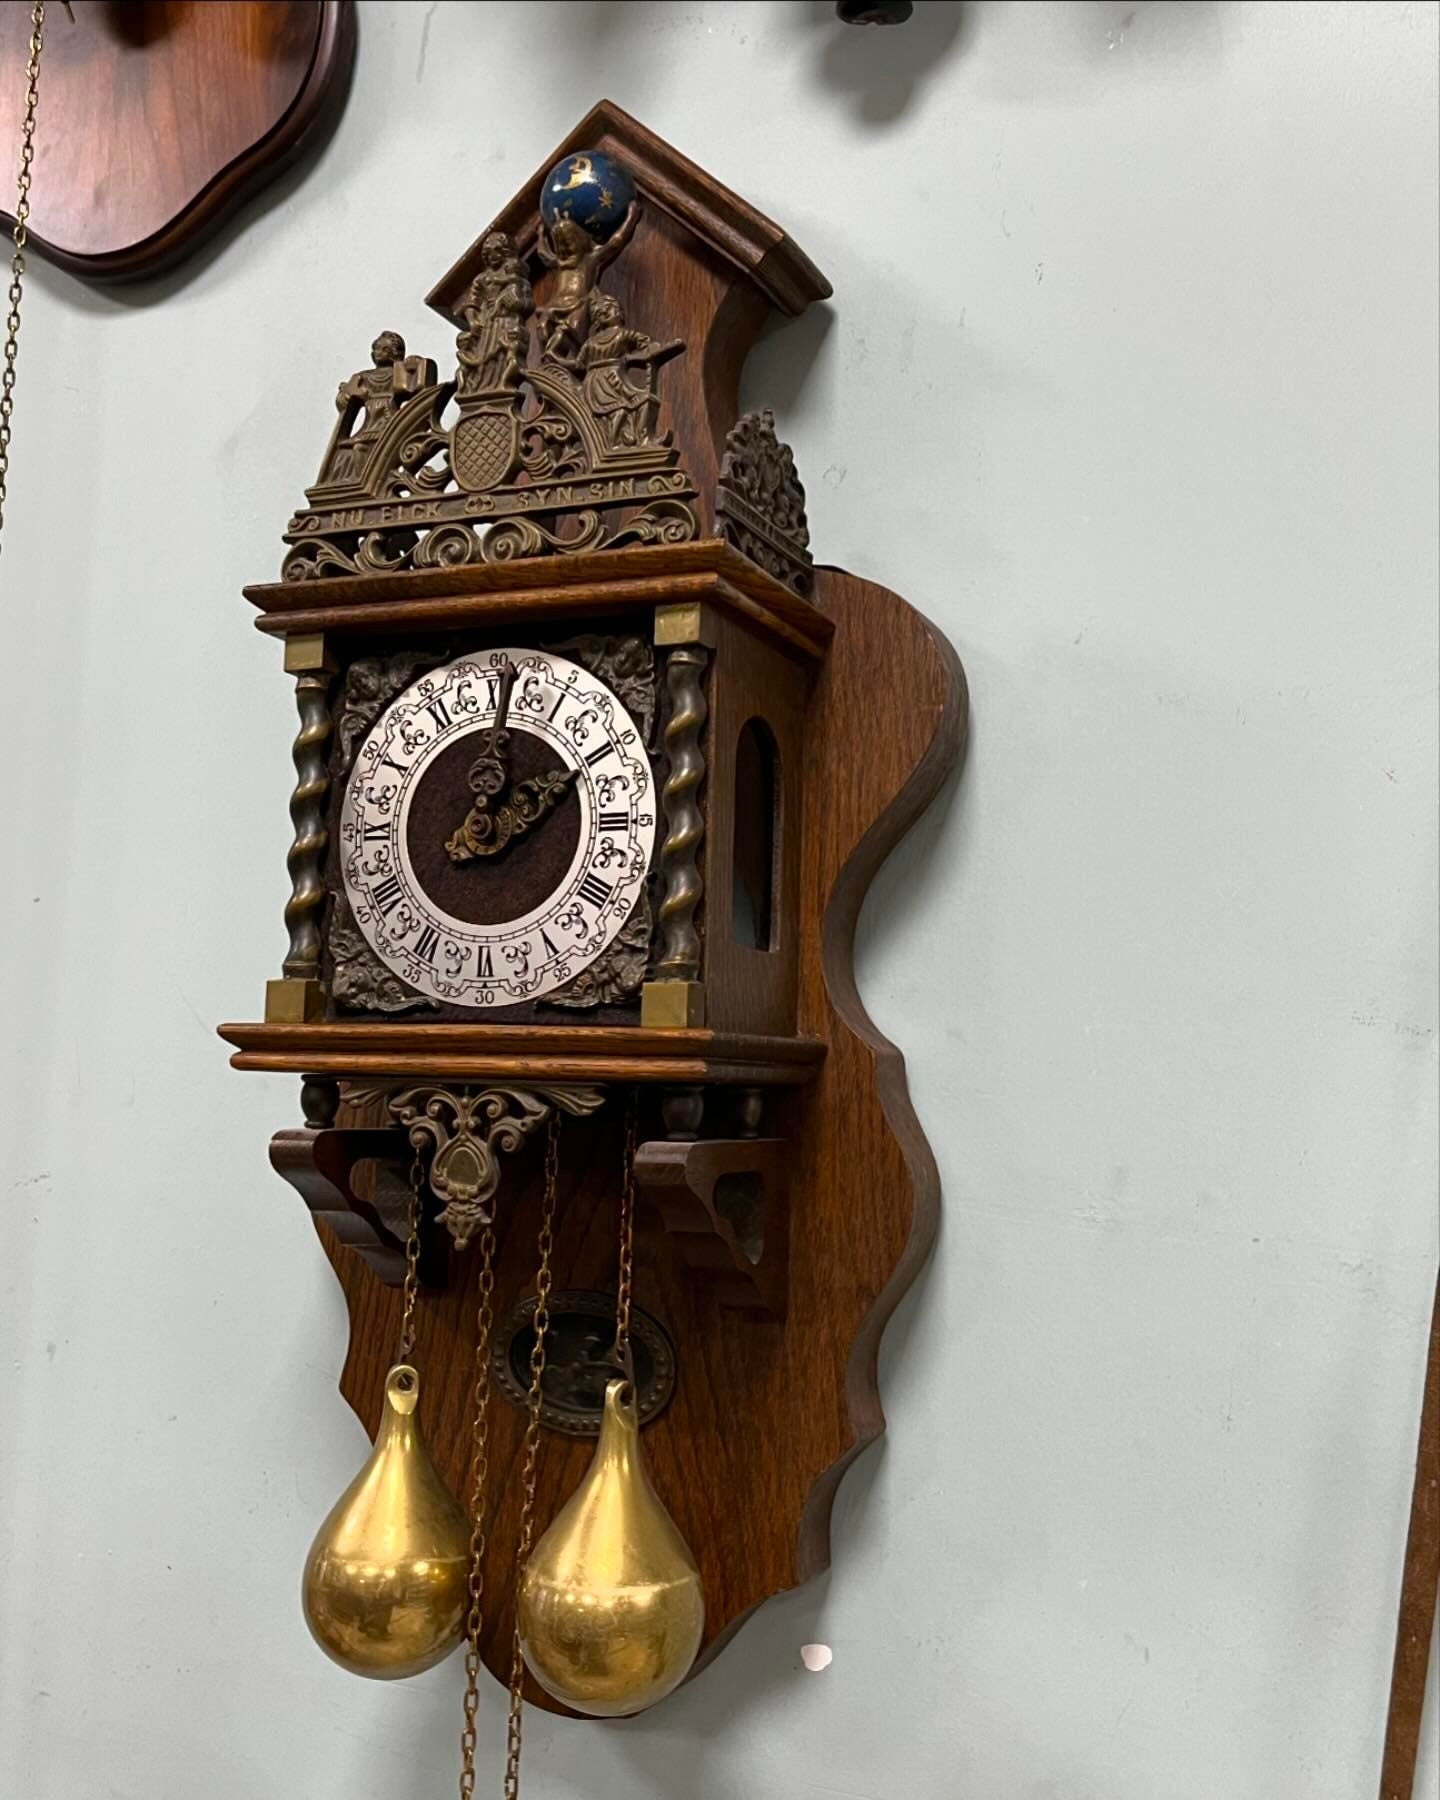 Antique Dutch Wall Clock with Gong Chime | Large Size 60x24 cm | Collectible Vintage Timepiece